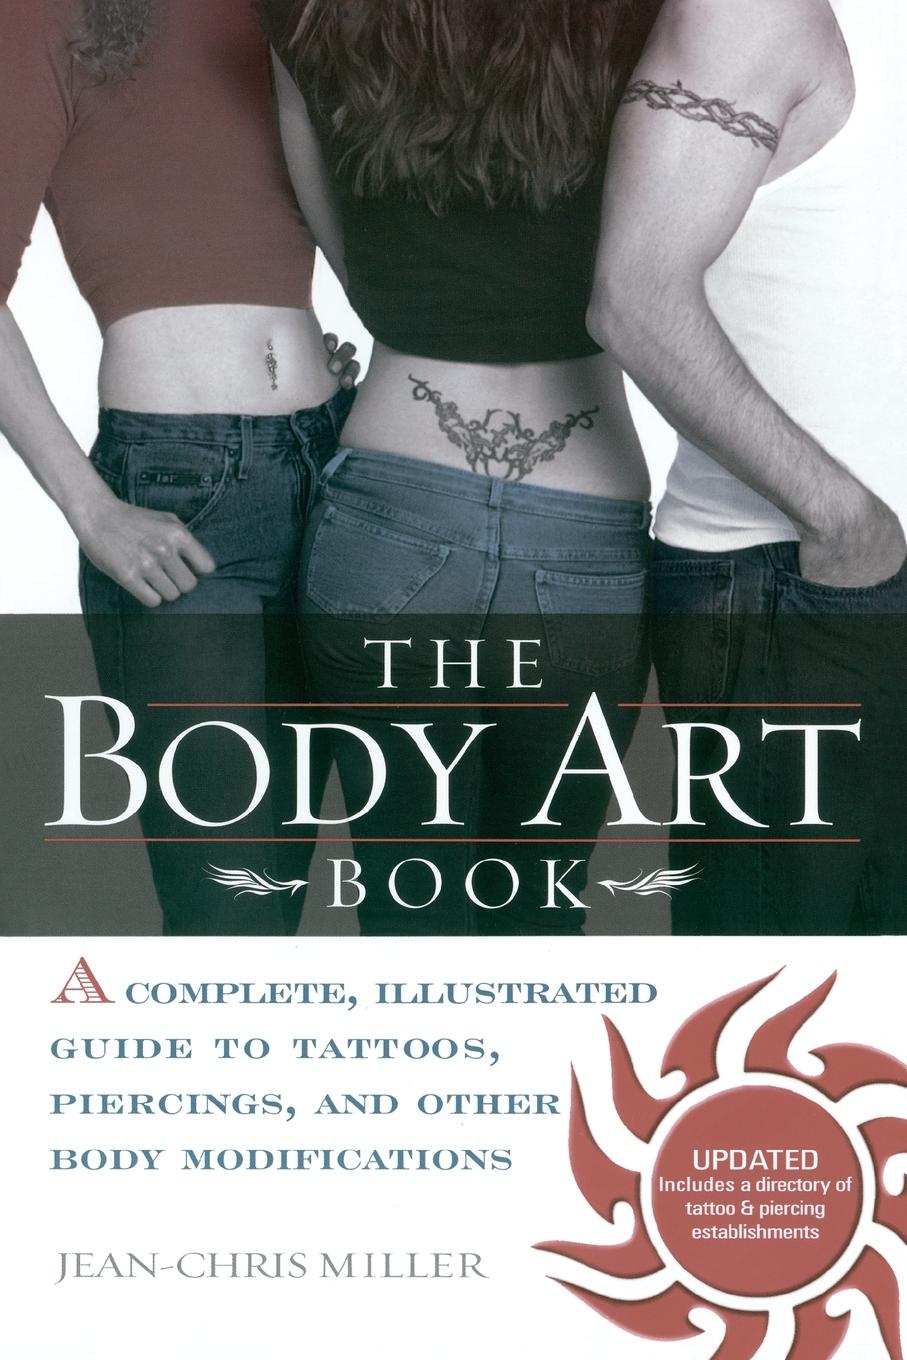 The Body Art Book / A Complete, Illustrated Guide to Tattoos, Piercings, and Other Body Modification / Jean-Chris Miller / Taschenbuch / Einband - flex.(Paperback) / Englisch / 2004 - Miller, Jean-Chris